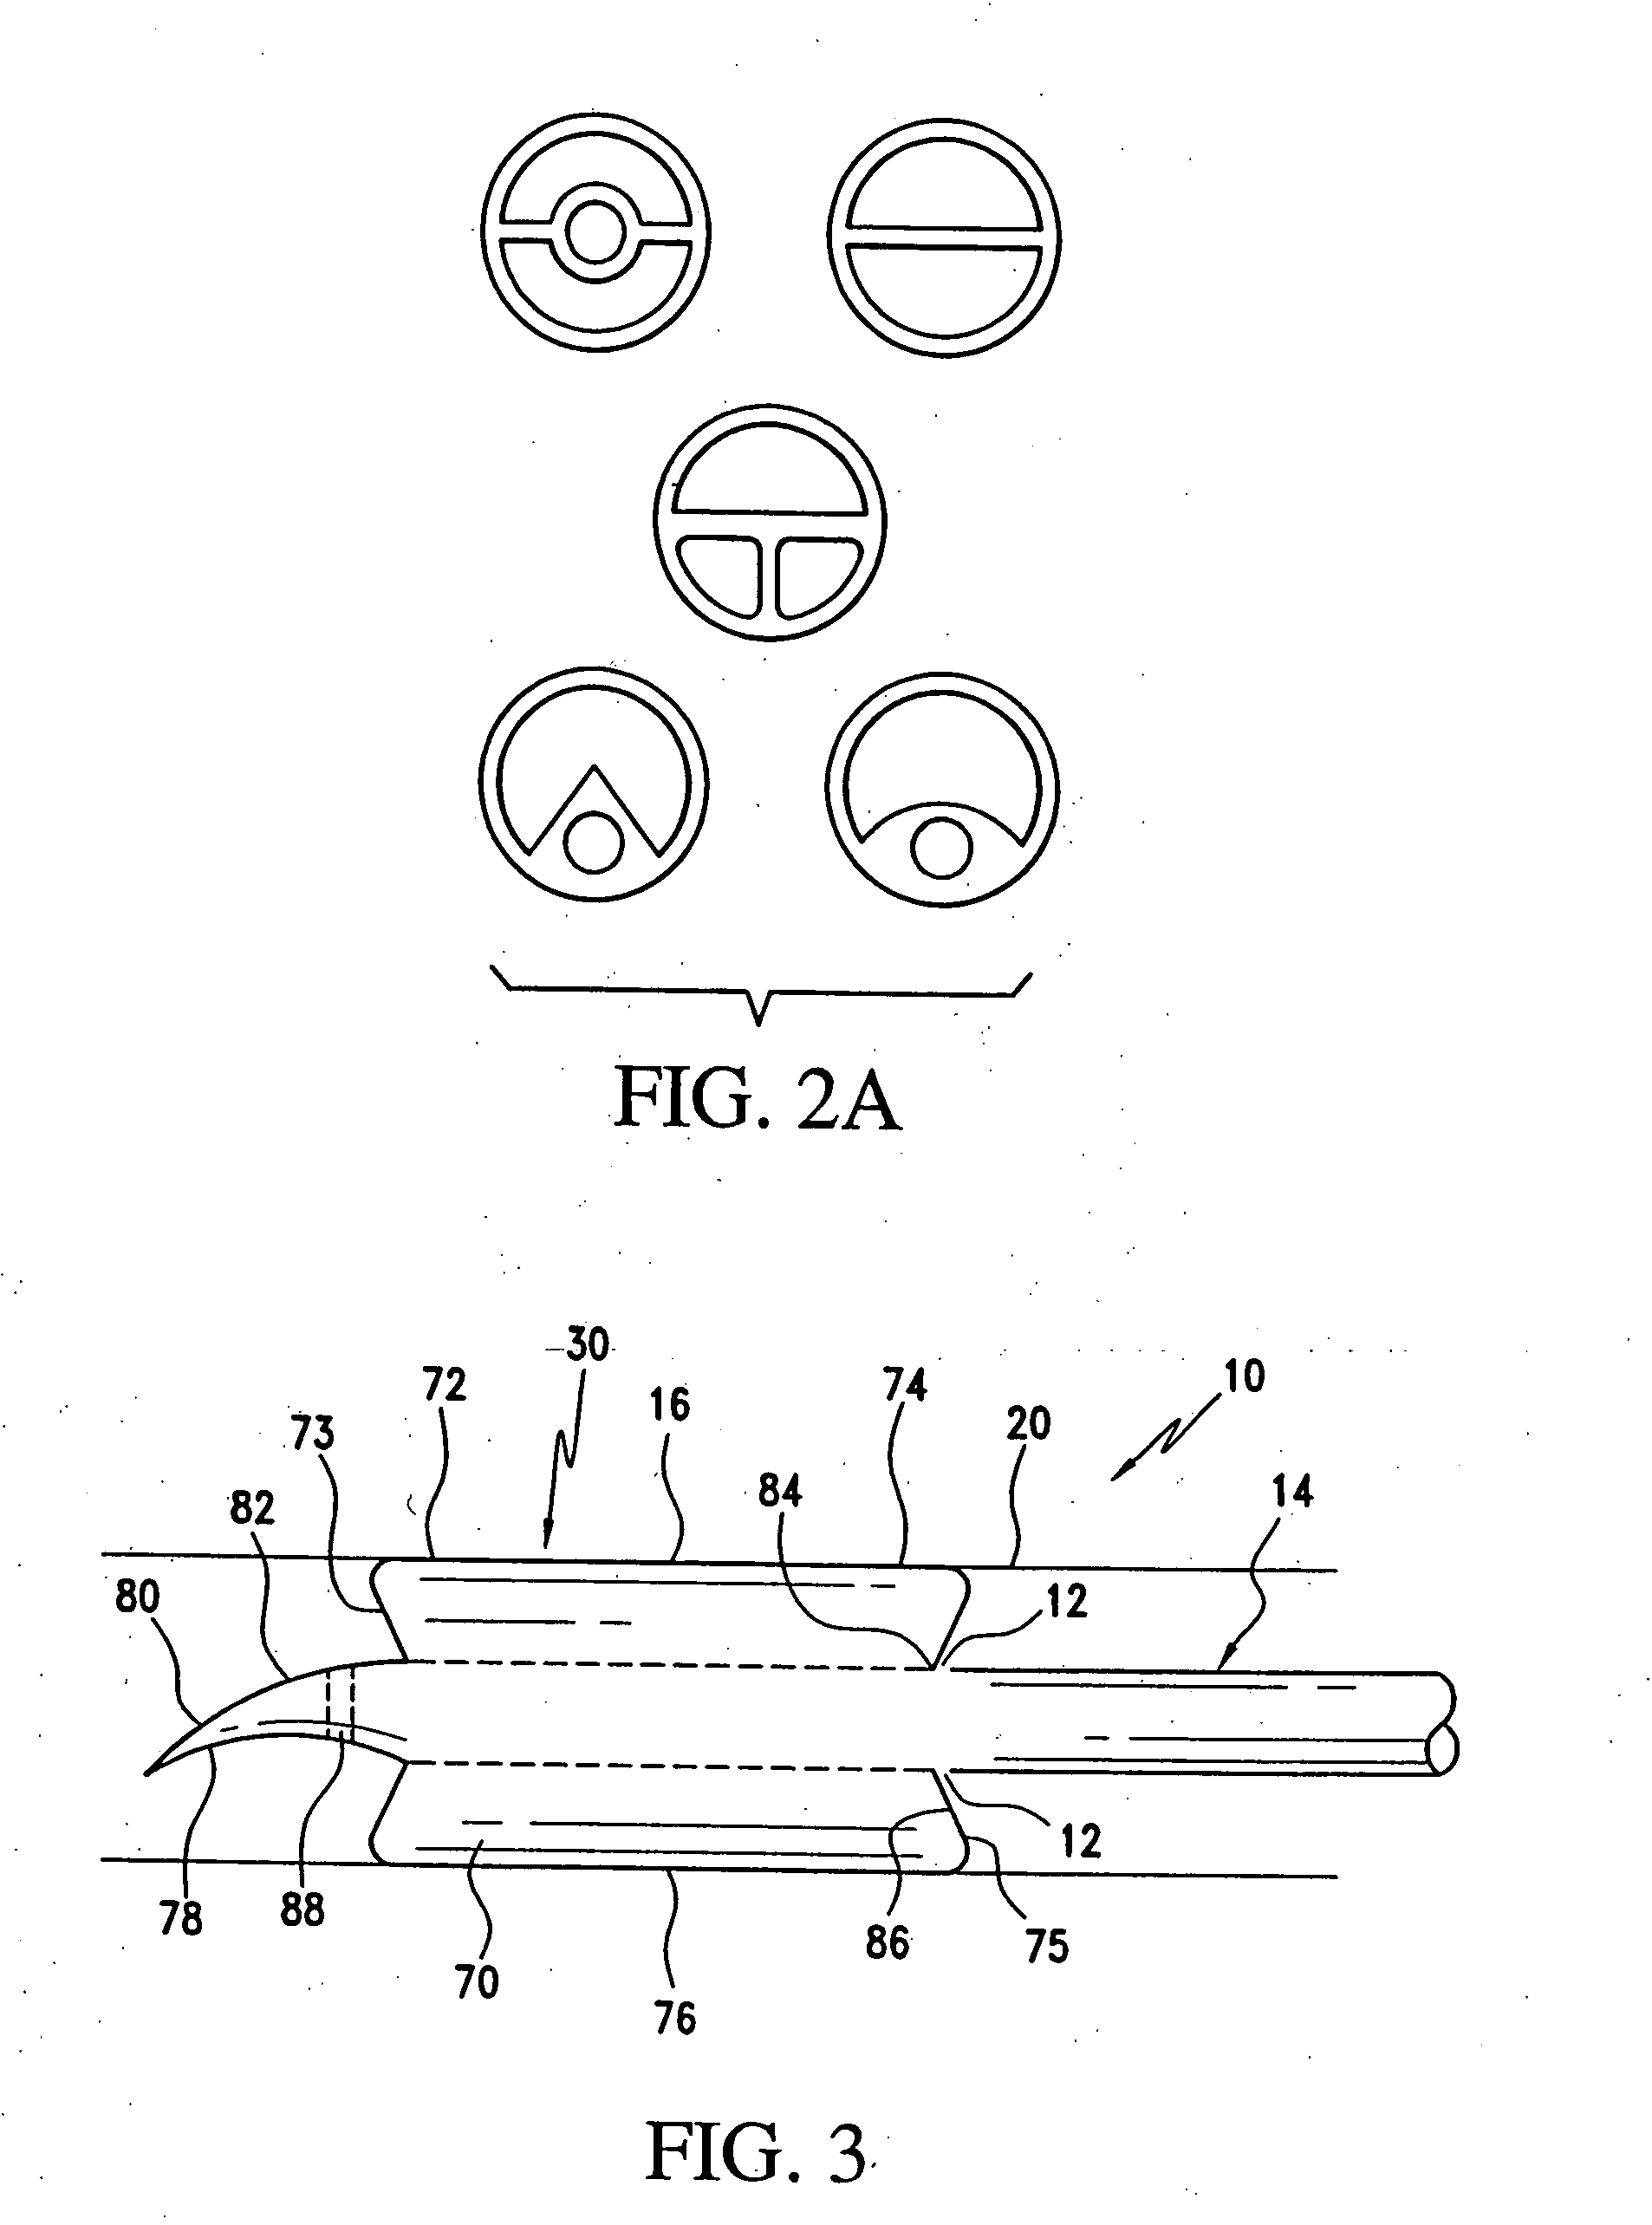 Method and apparatus for treatment of thrombosed hemodialysis access grafts and arterio venous fistulas